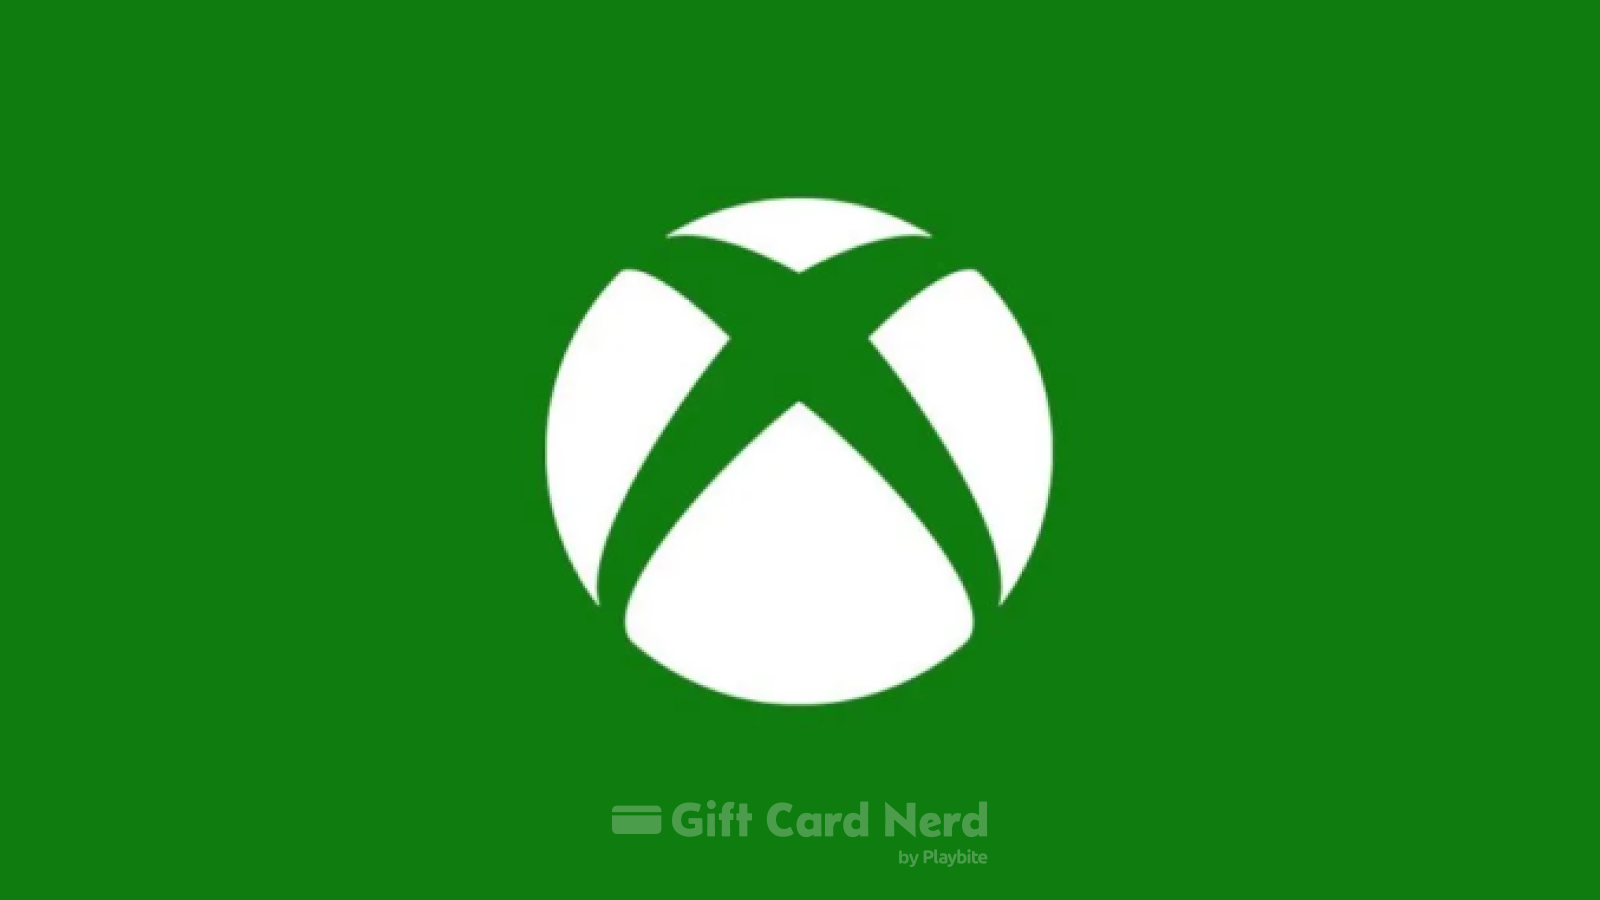 Does Walgreens Sell Xbox Gift Cards?